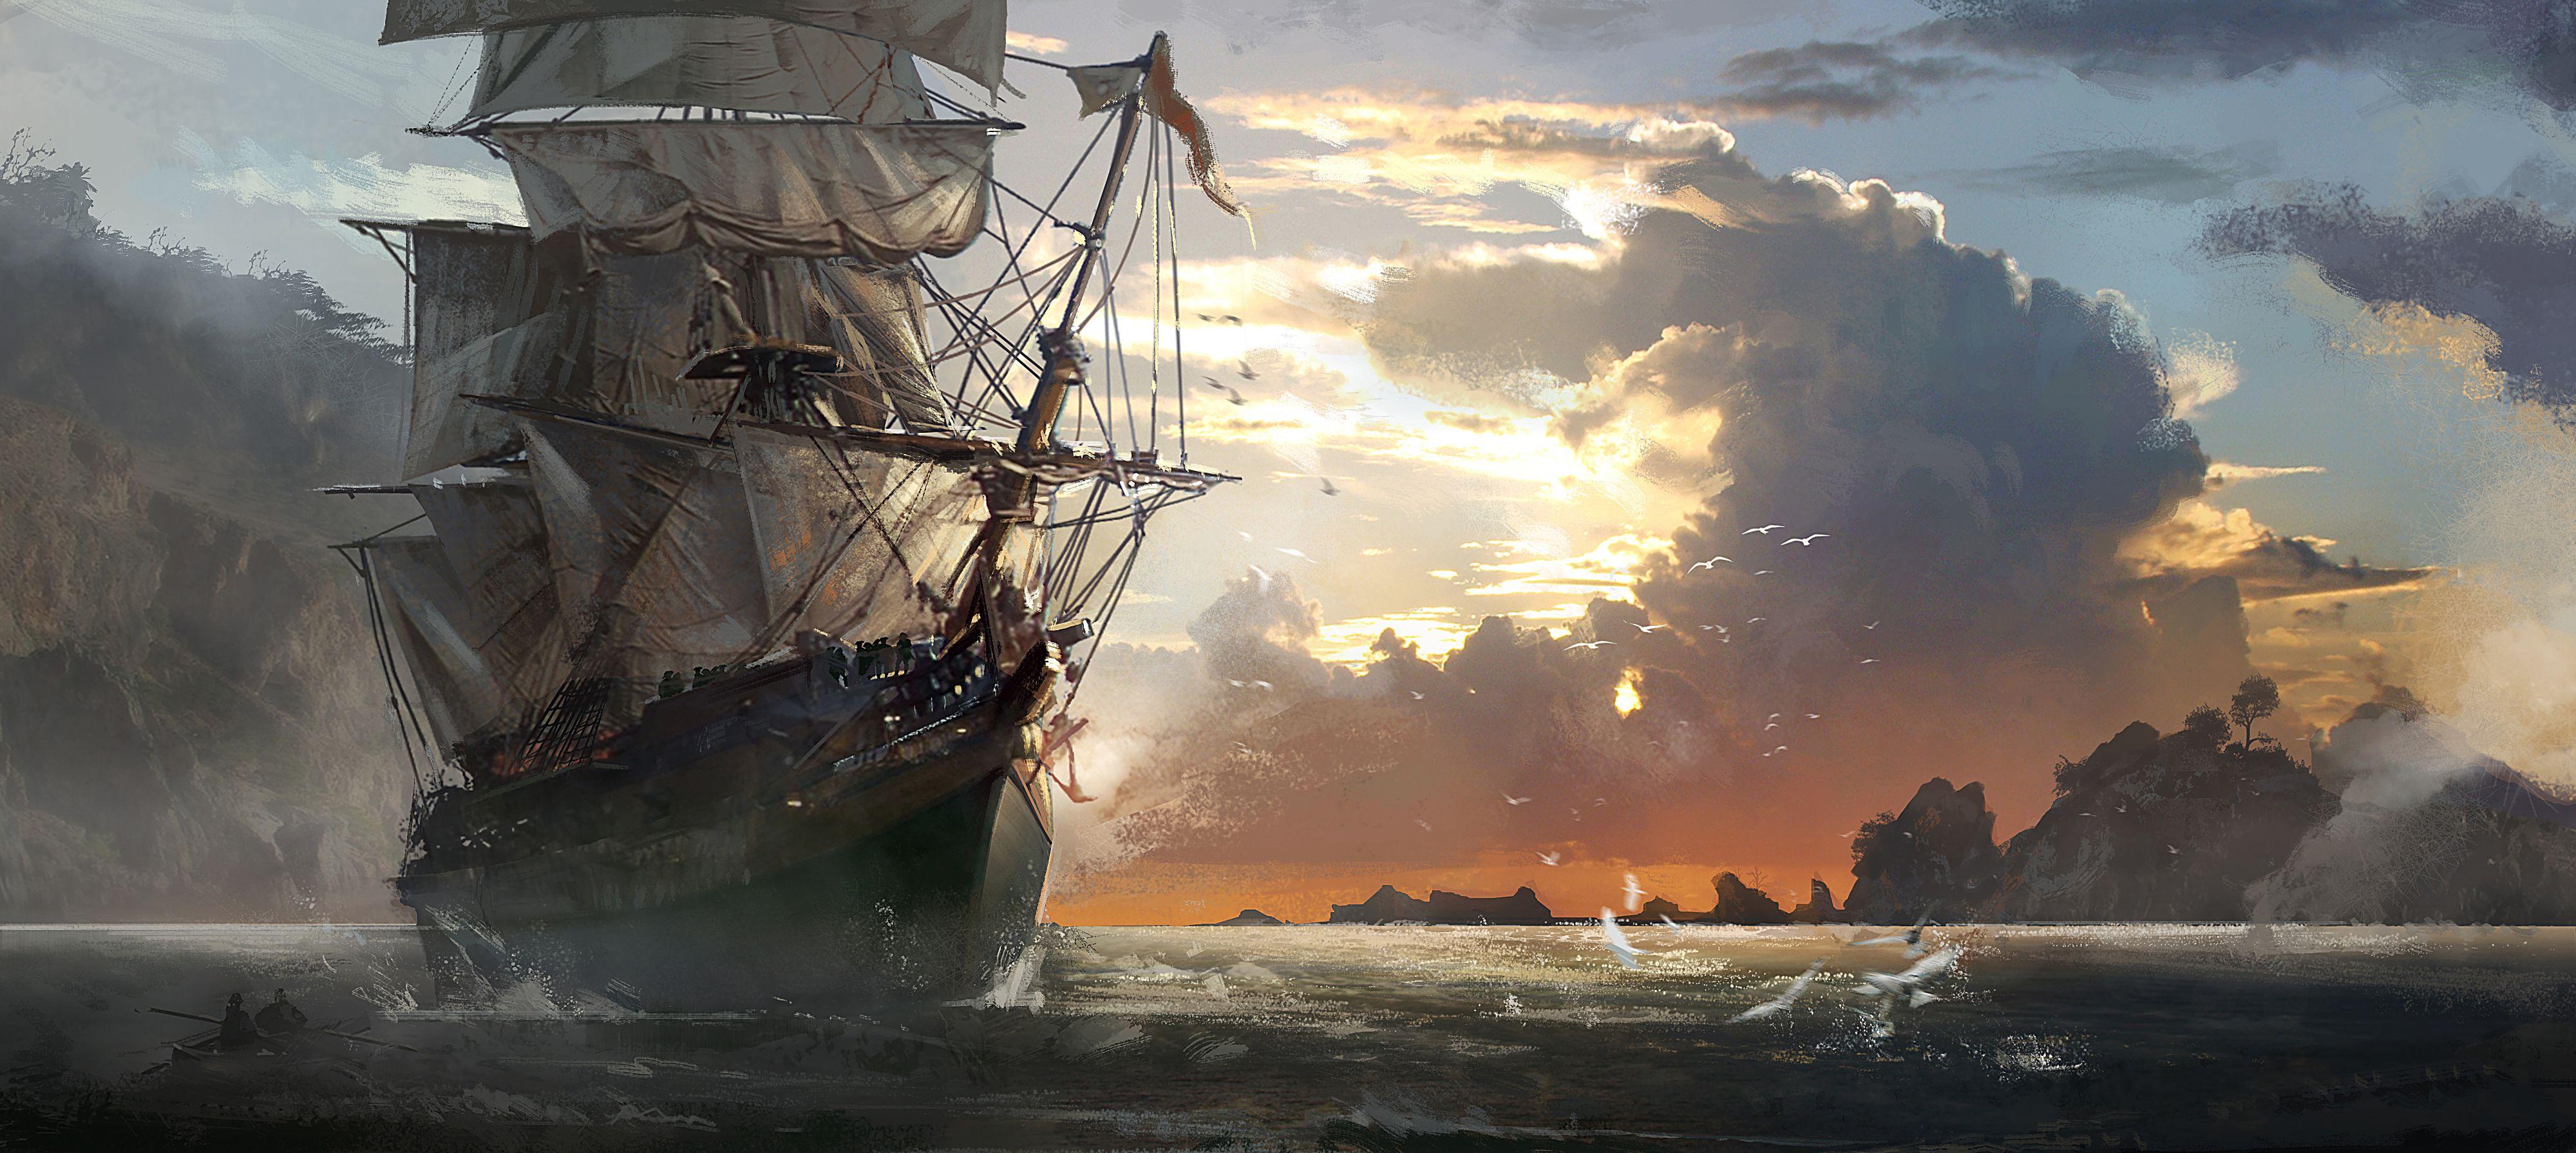 Colorful Pirates Ship Image Pirate HD Wallpaper And Background